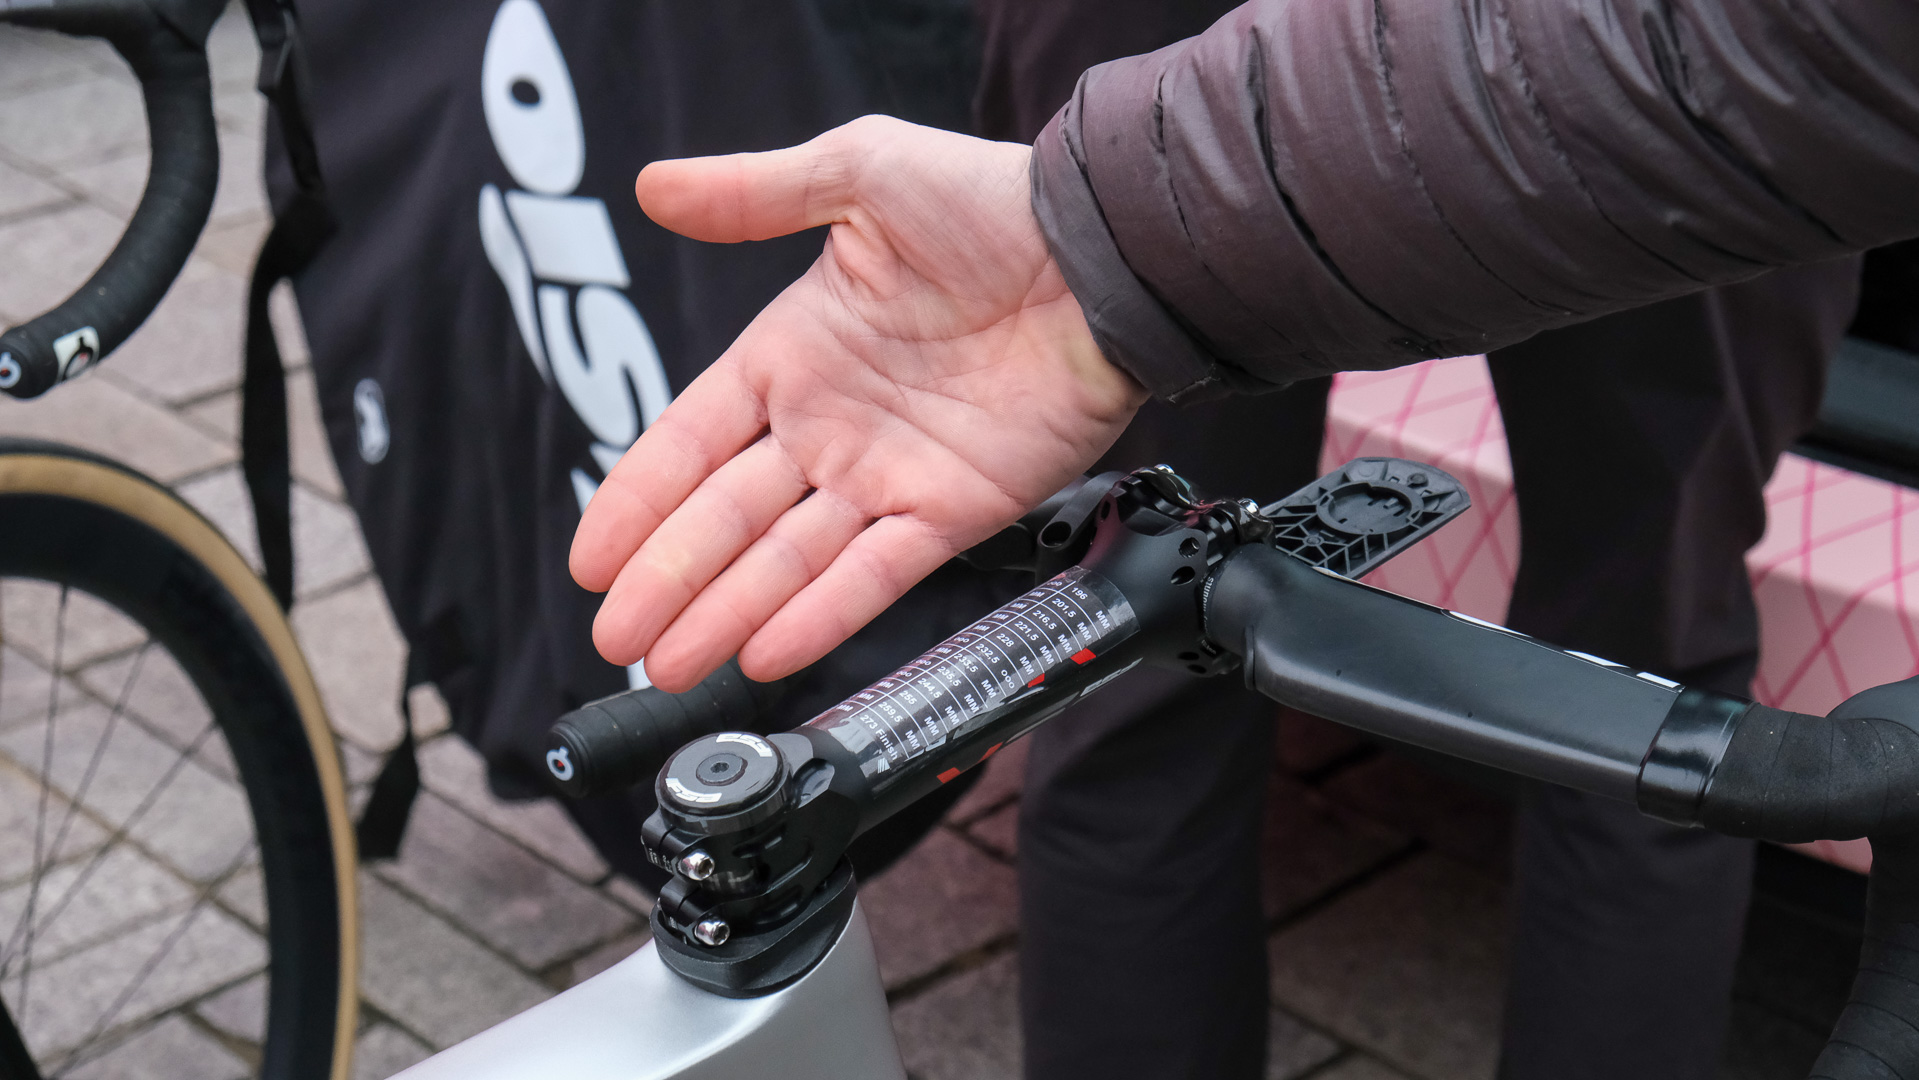 A view of an exceptionally long (140mm or more) stem on a pro rider's bike, shown to illustrate the aggressive riding positions pro riders use.